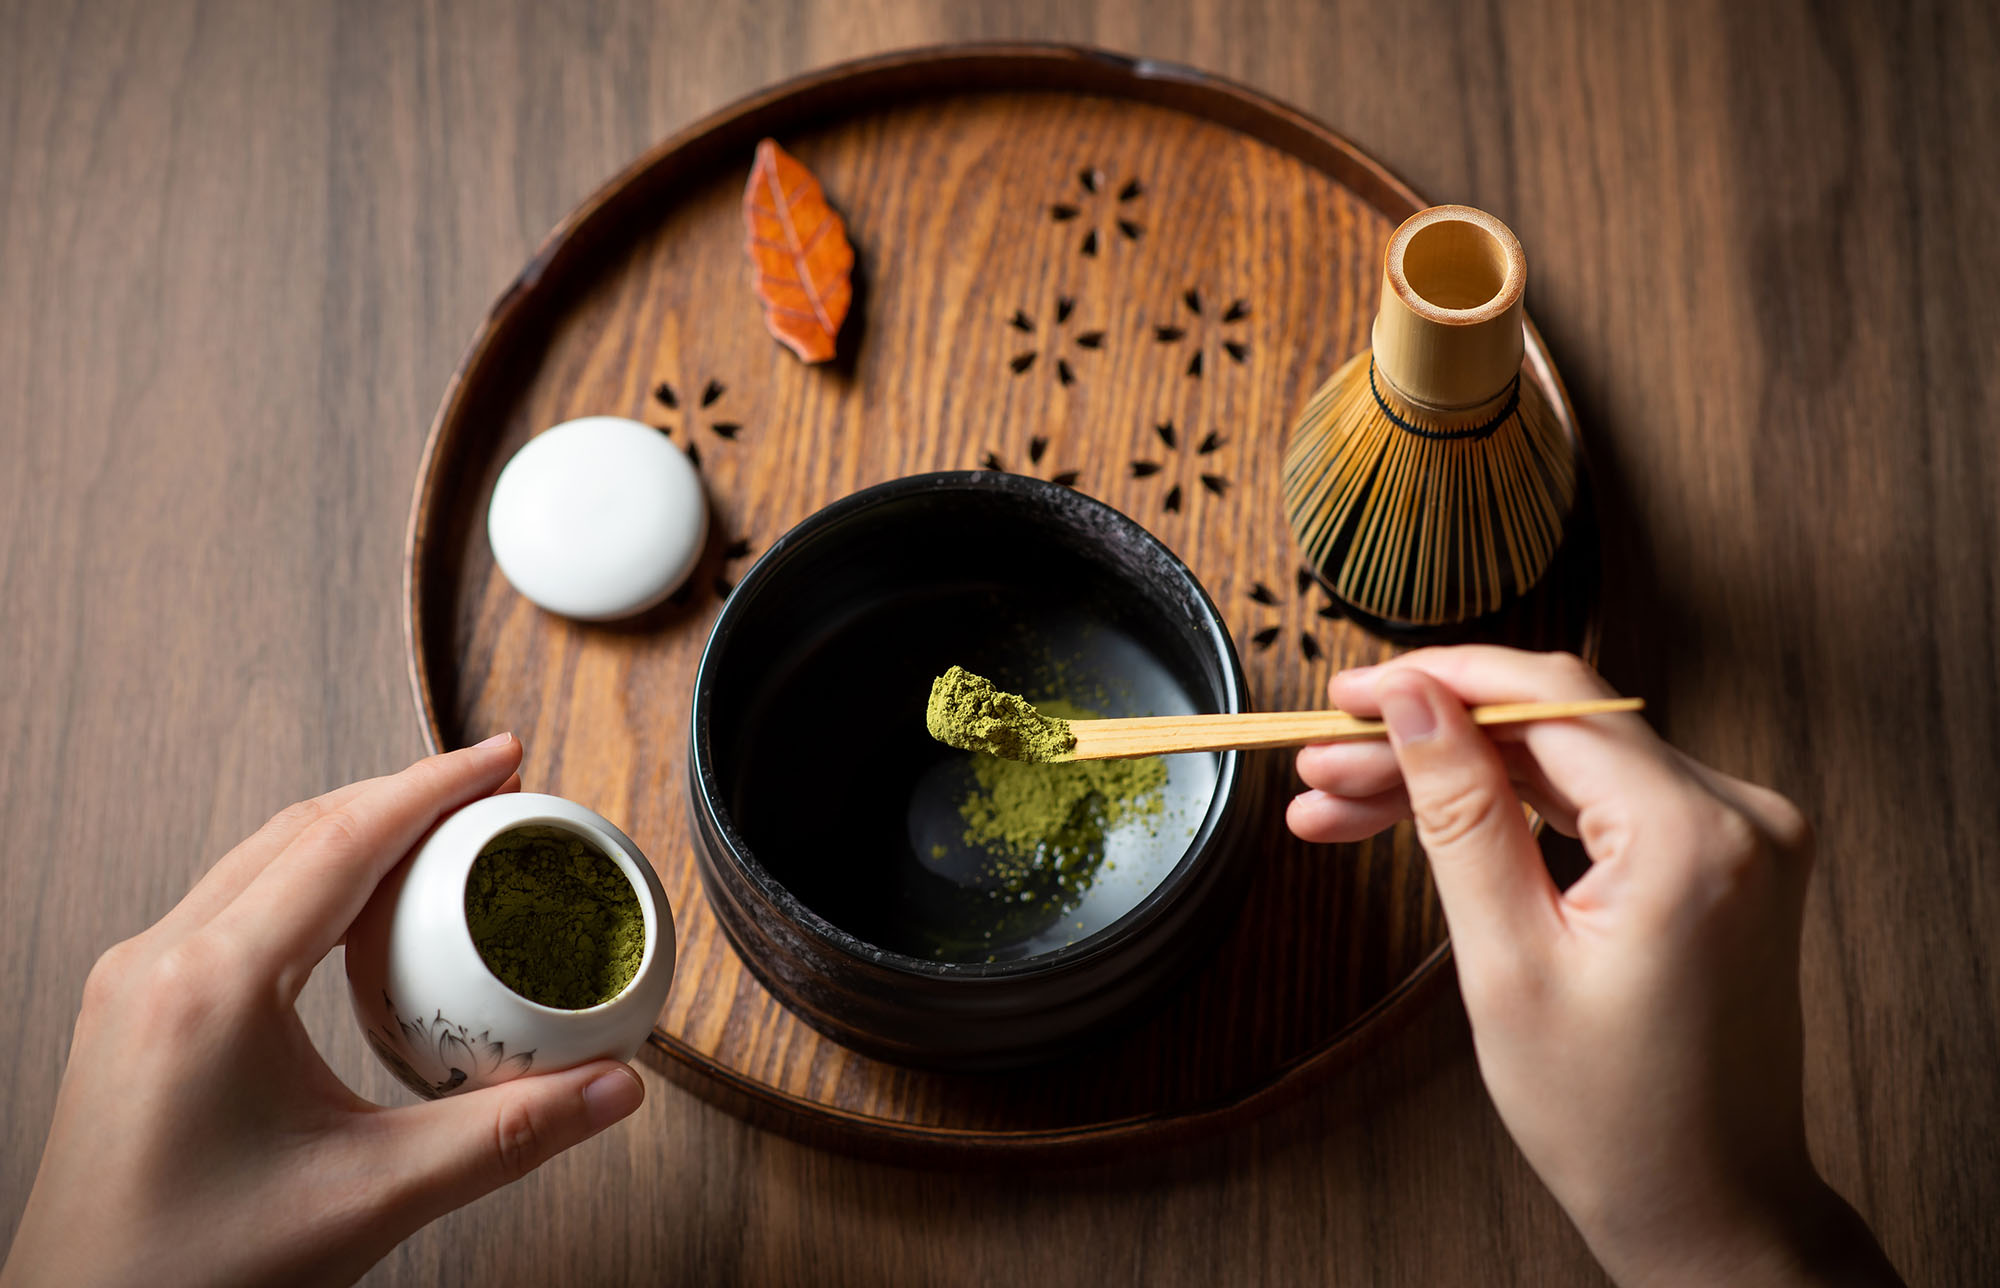 Attend a Traditional Tea Ceremony in Japan